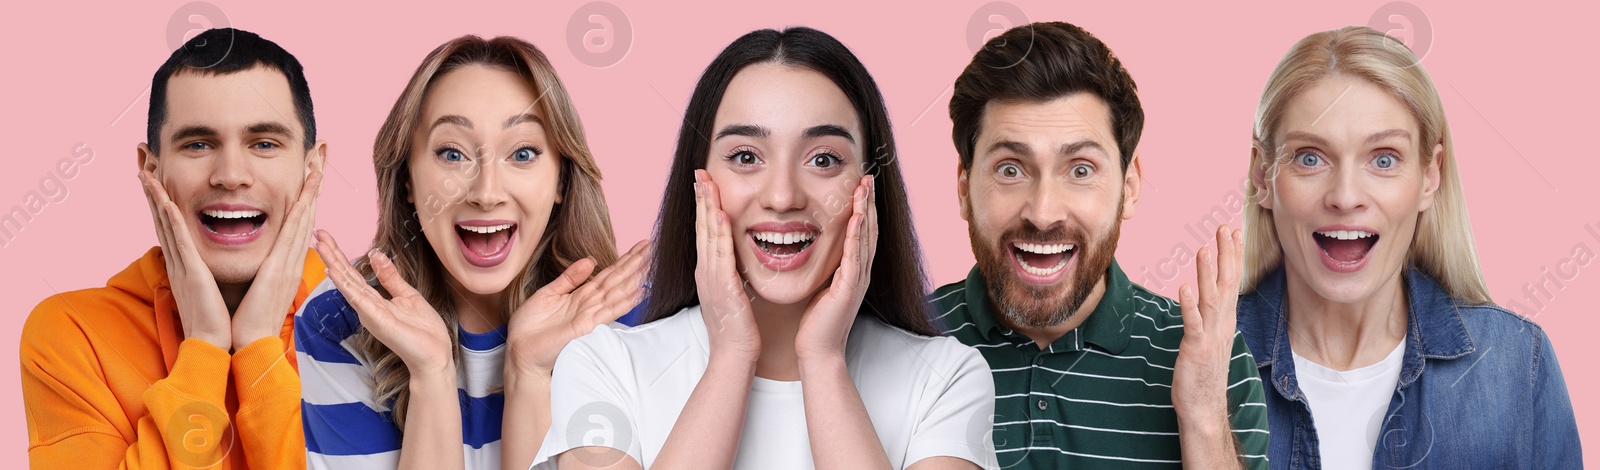 Image of Group of surprised people on pink background, banner design